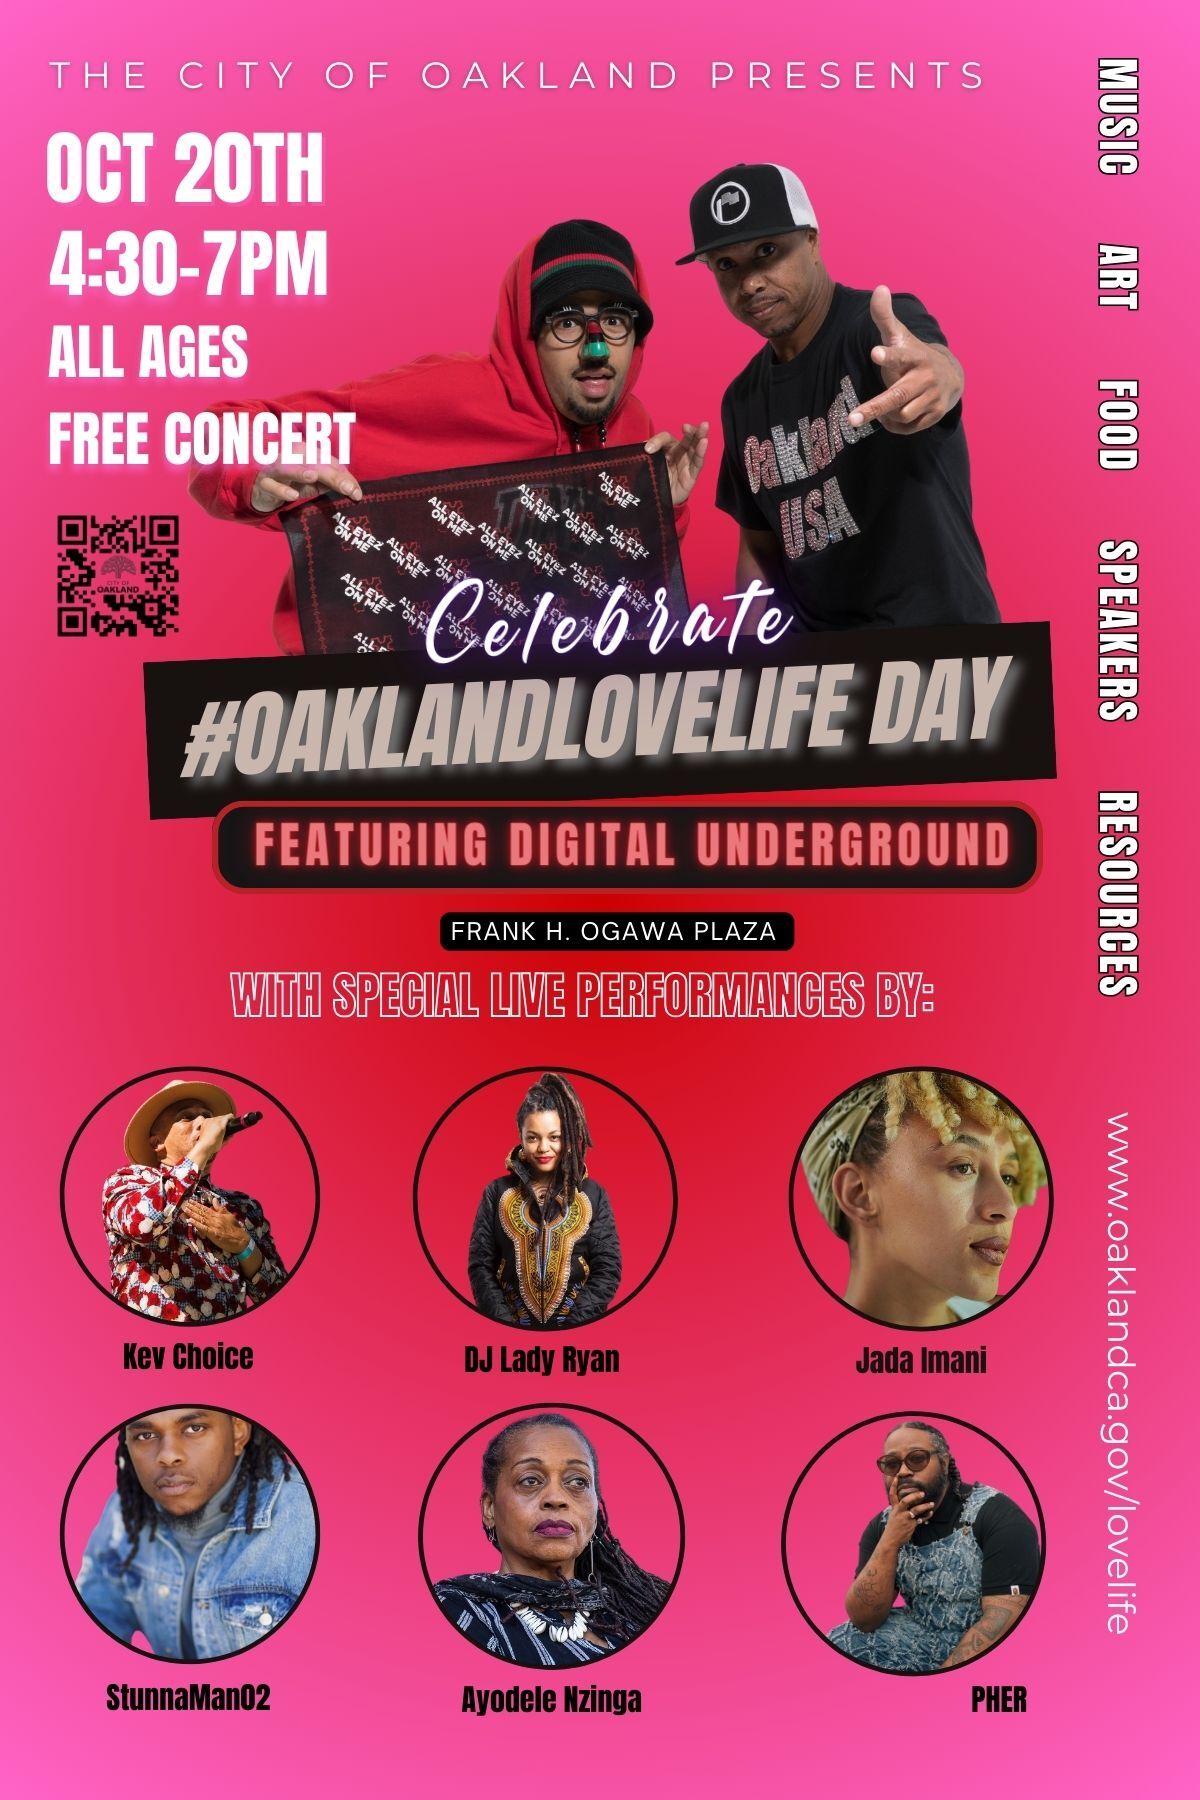 Oakland Love Life Day 2023 on 10/20 at Frank H. Ogawa Plaza from 4:30-7PM. Free for all ages.